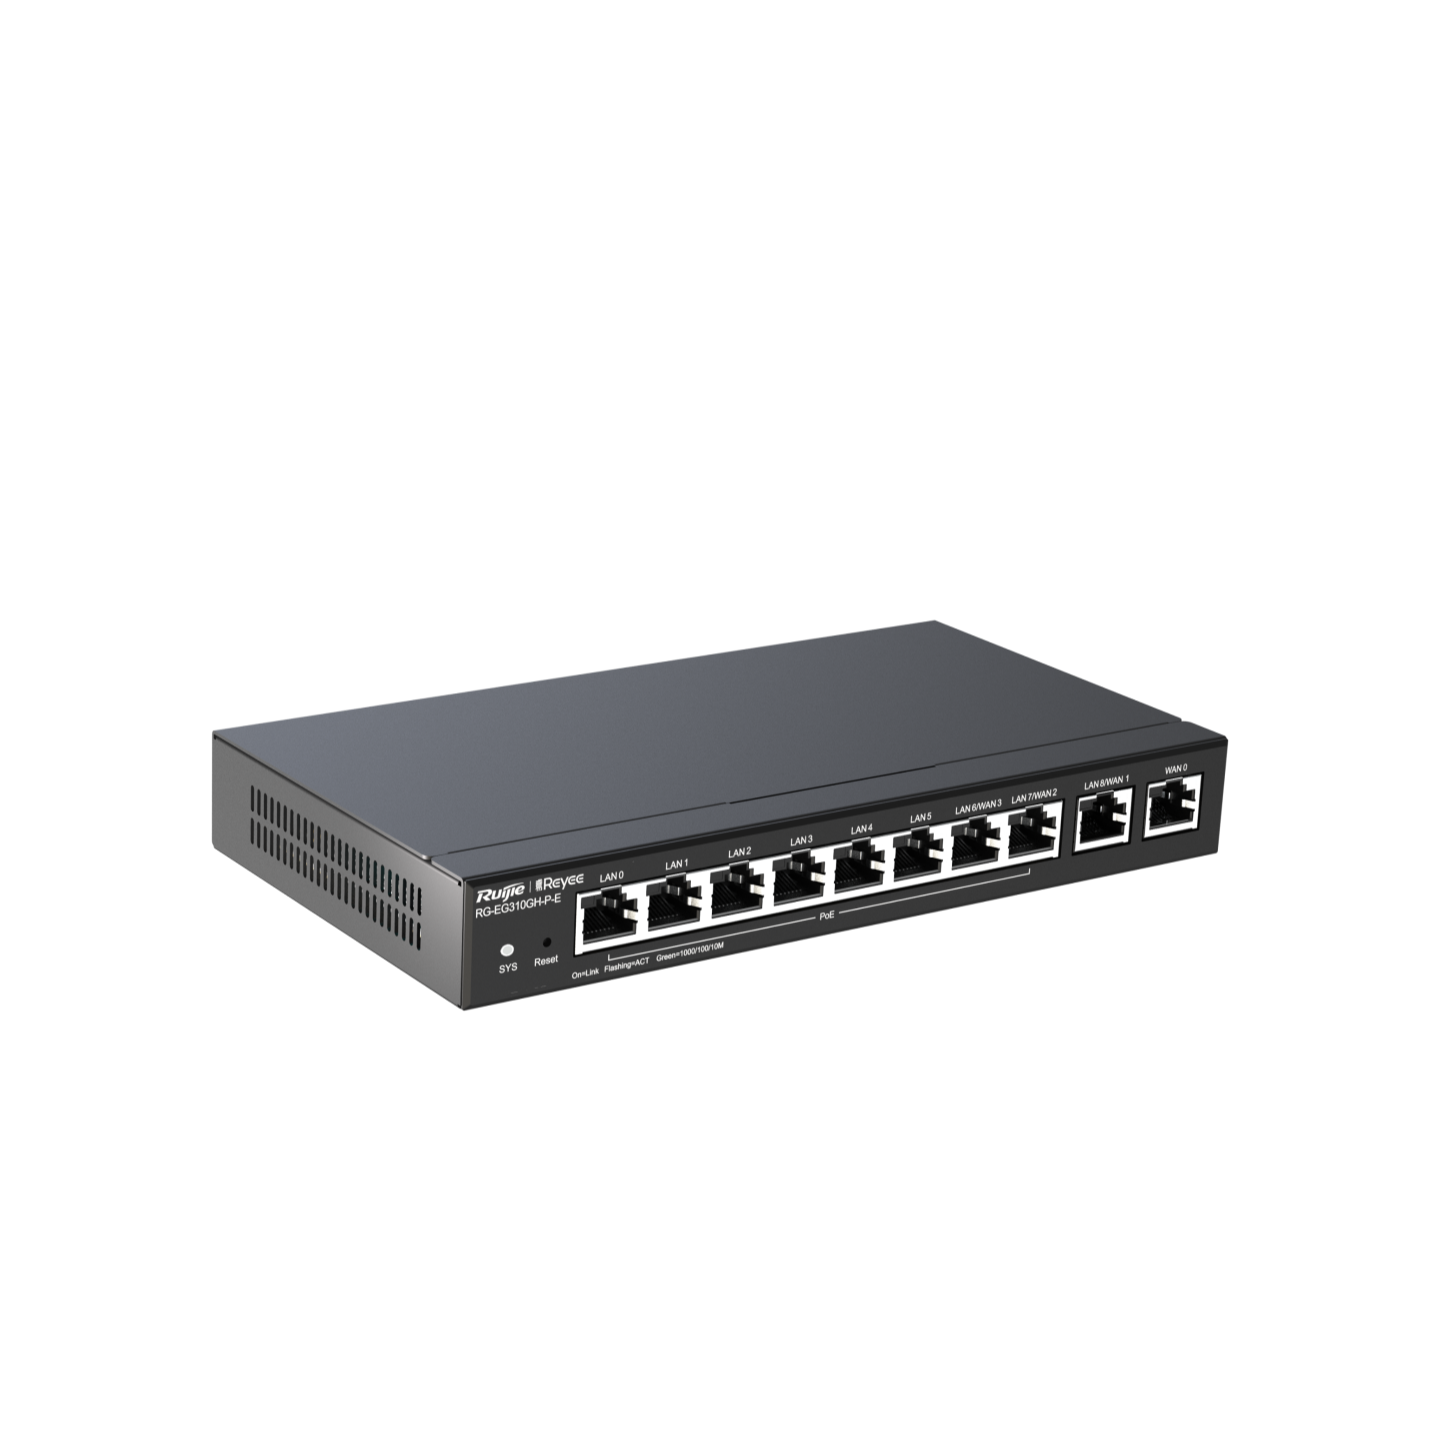 Маршрутизатор Ruijie Reyee Rack-mountable 10-port full gigabit router, providing one WAN port, six LAN ports, and three LAN/WAN ports; recommended concurrency of 300, maximum 1.5 Gbps throughput; cloud remote management s